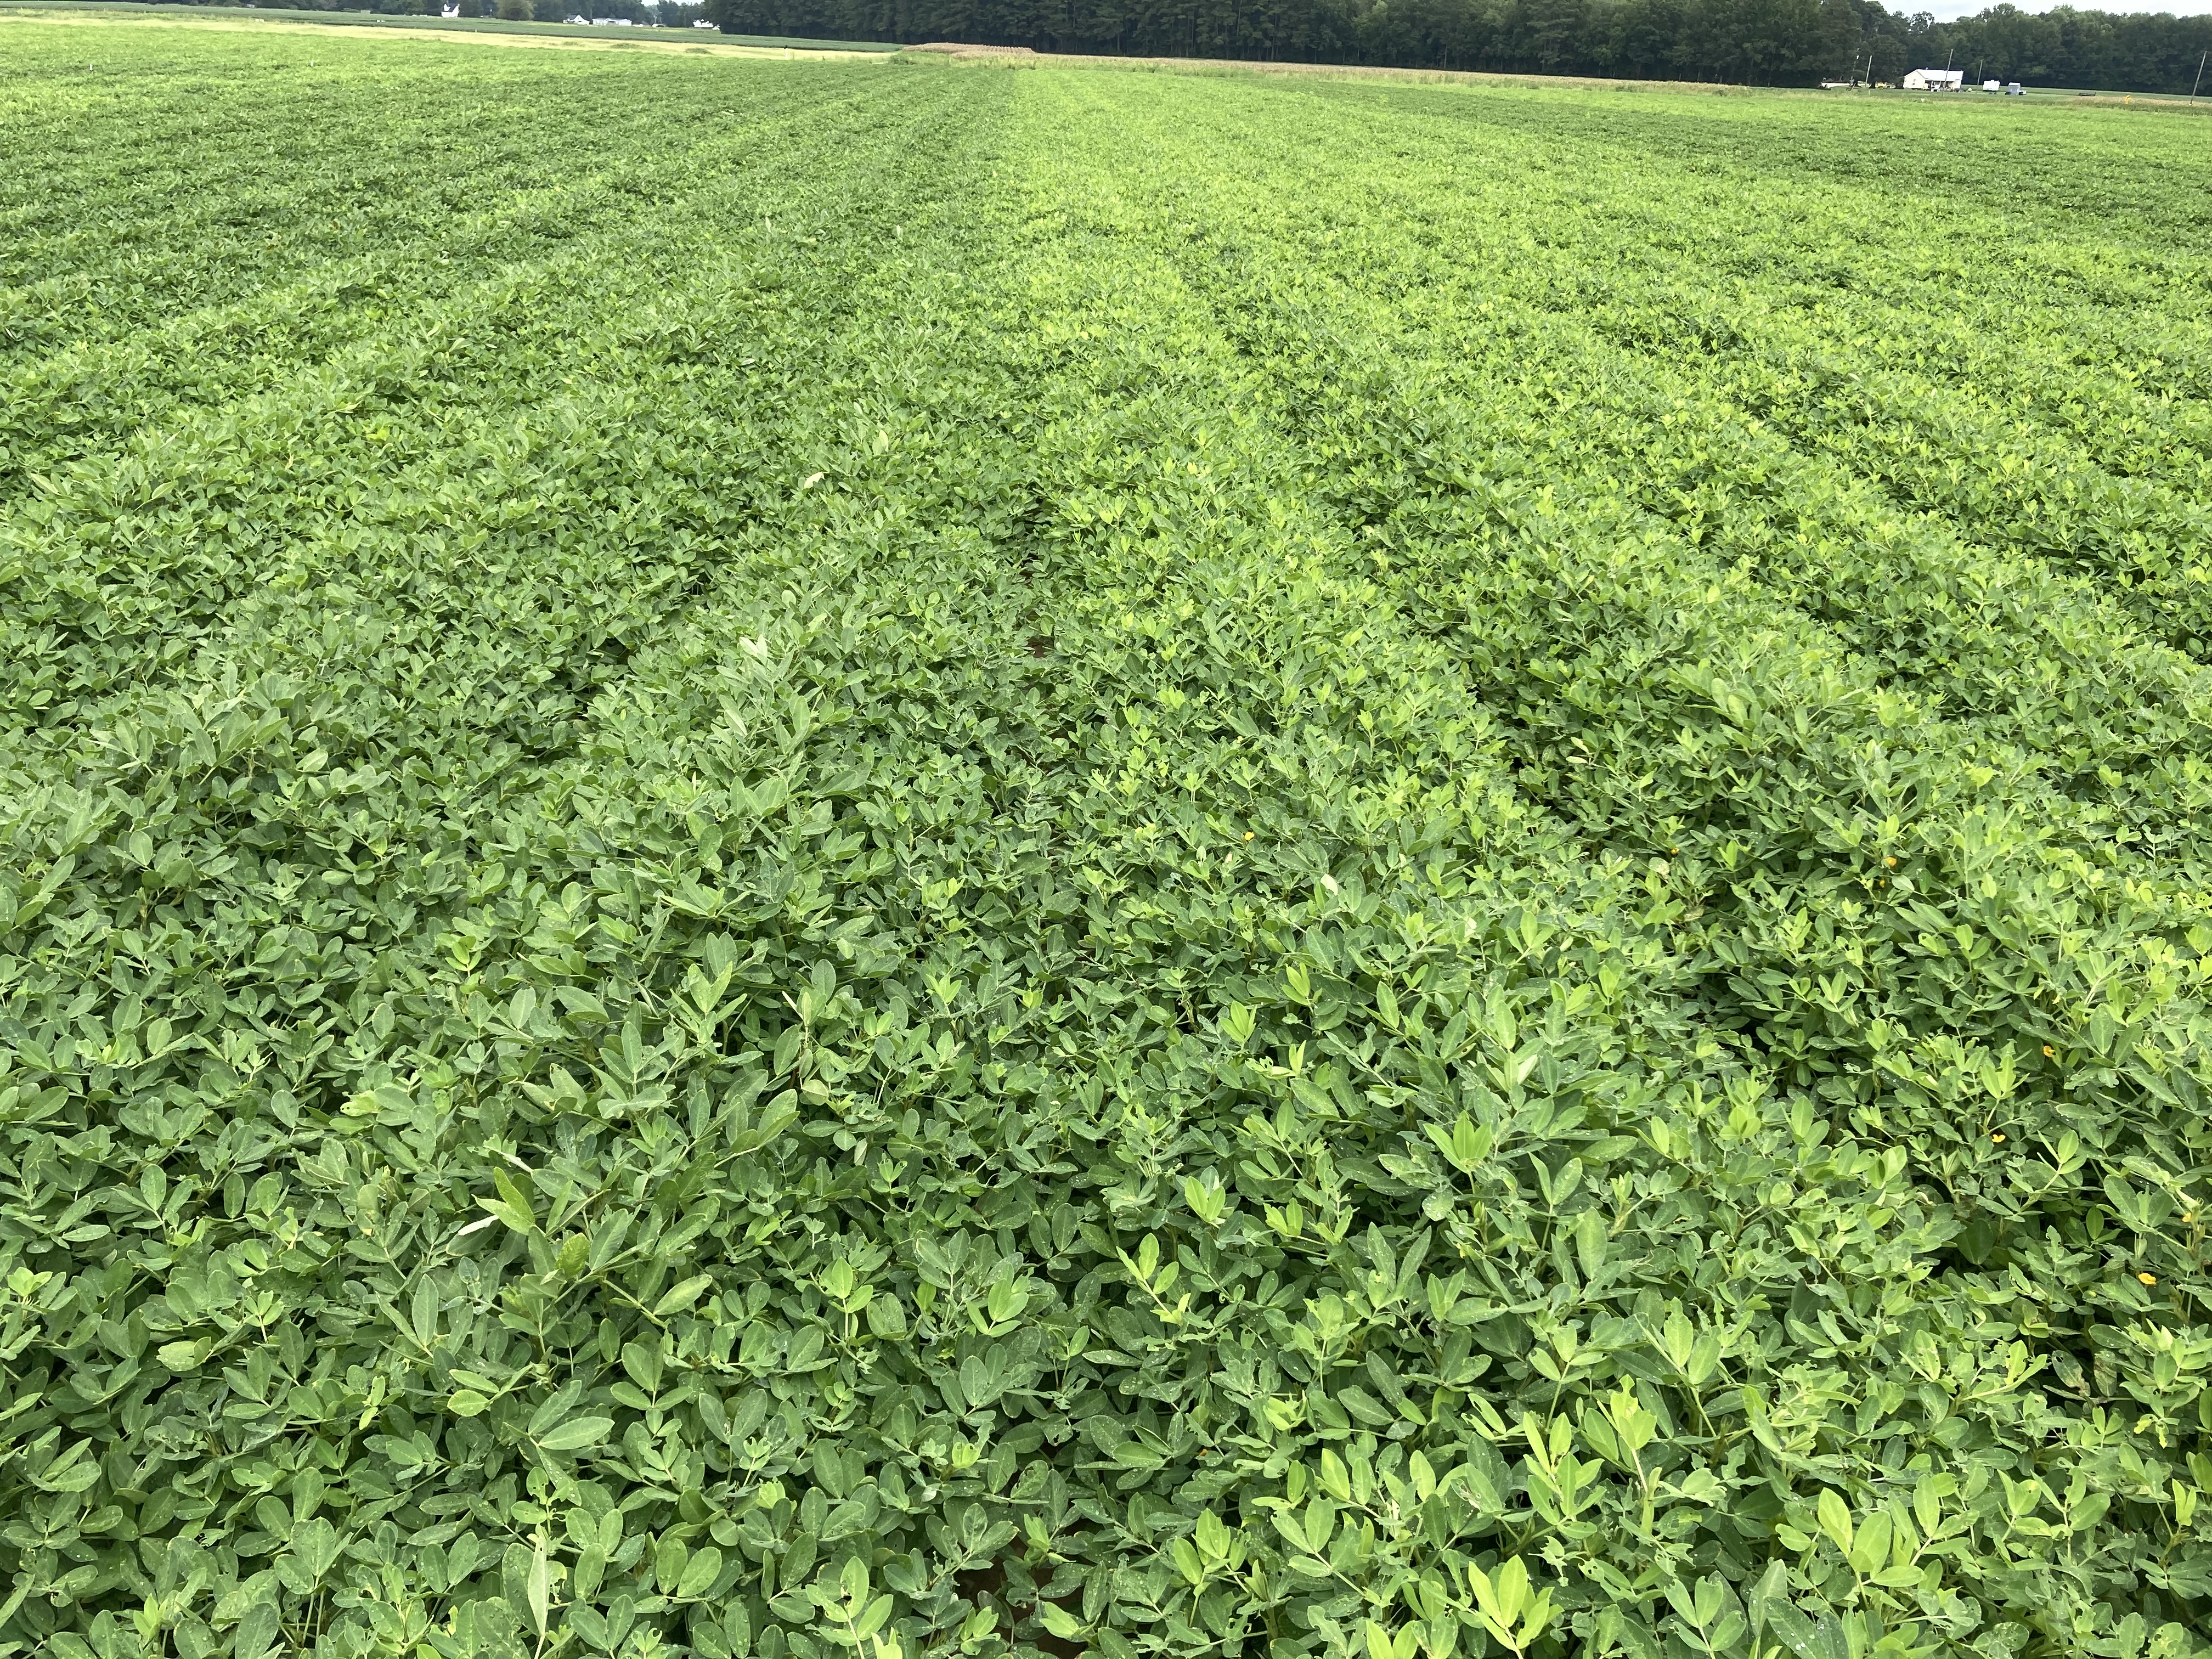 Peanut field showing new growth after treatment.